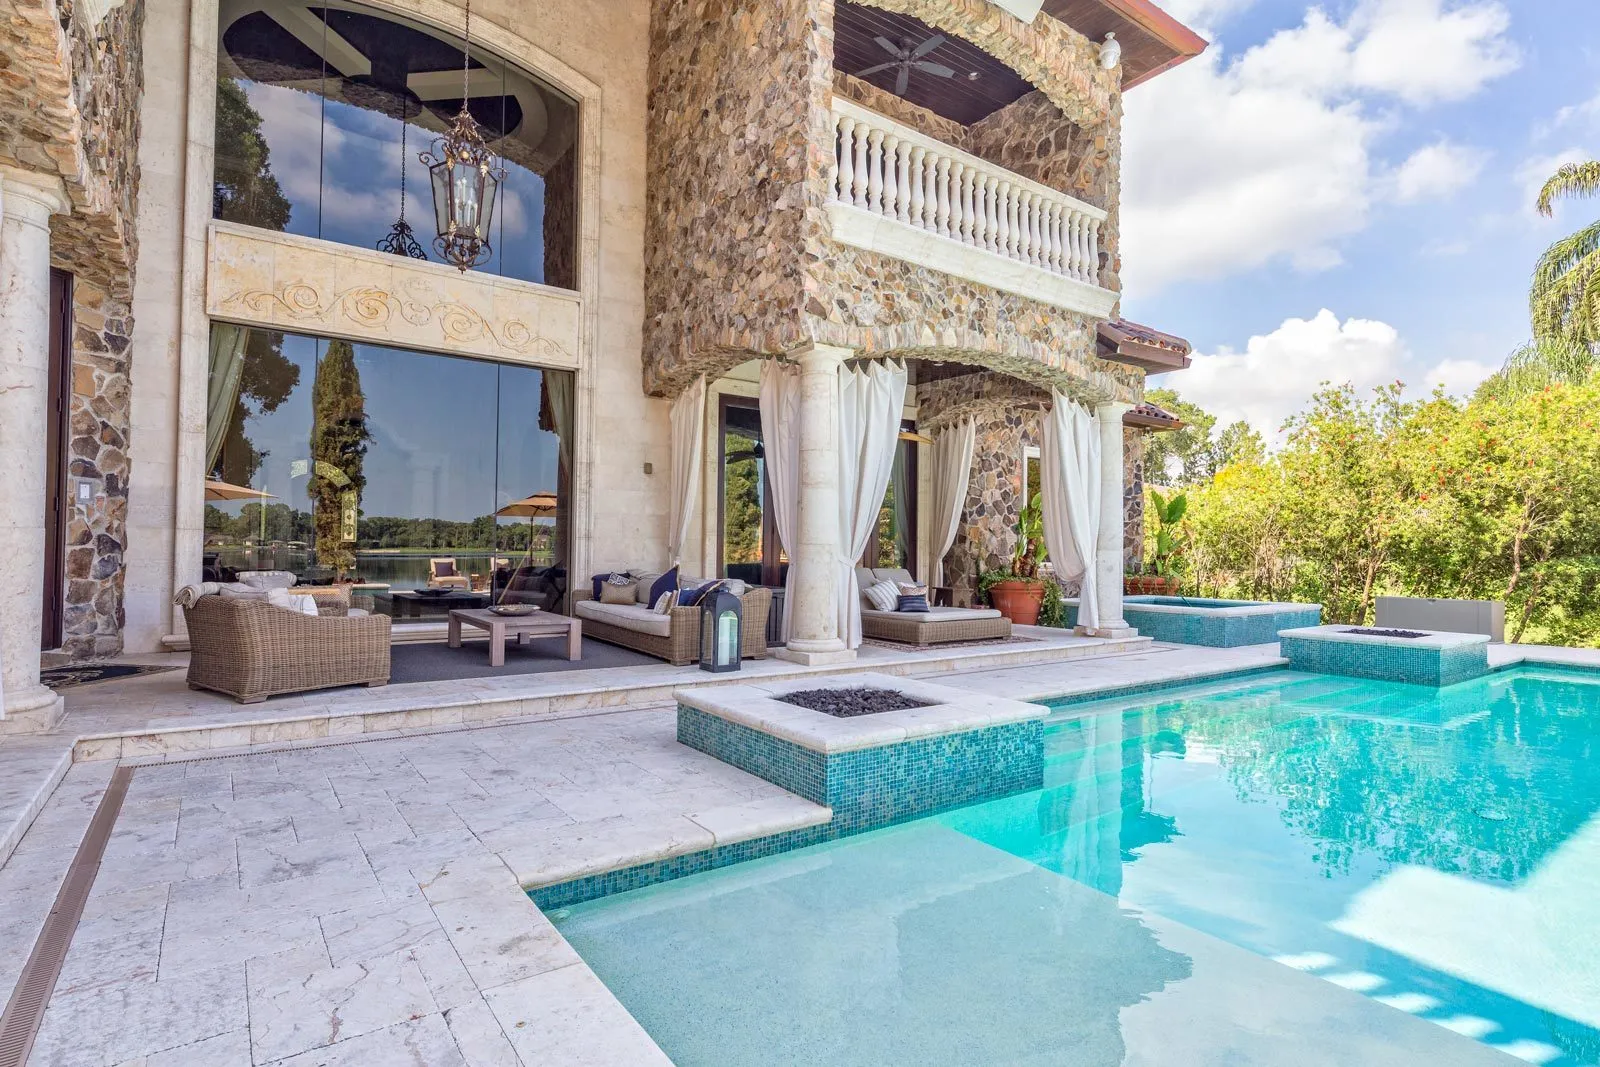 Beautiful home in Texas we provide pool maintenance to